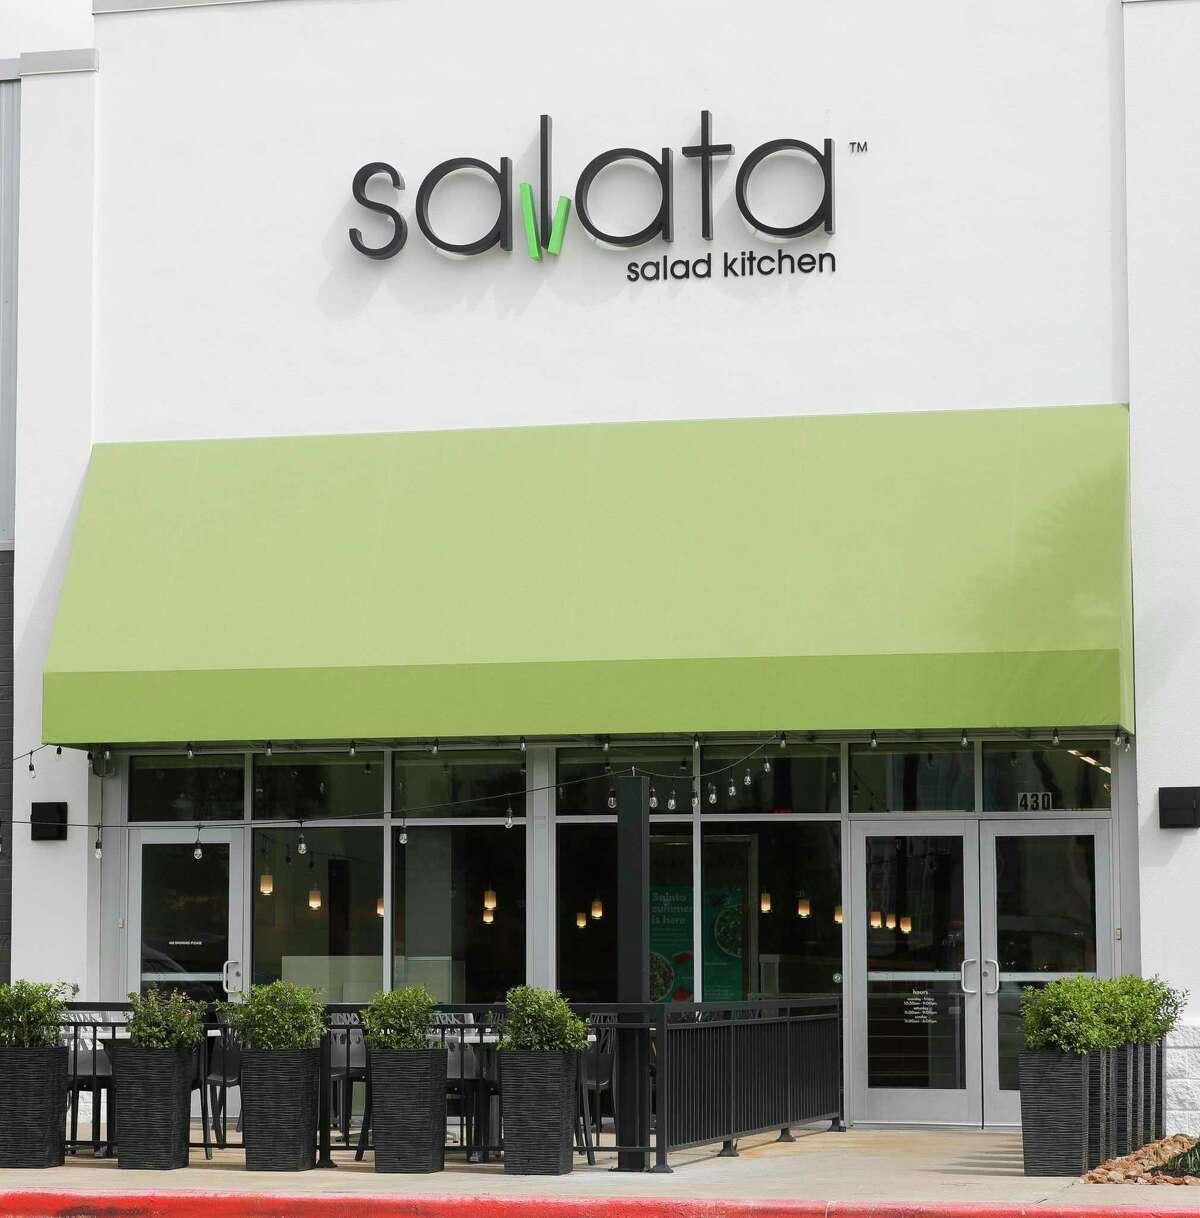 Salata is one of several new restaurants to open along The Woodlands Mall’s ring road. The salad specialists join other newcomers, Bigotes Street Tacos and Ta’bleyah Mediterranean Cuisine both in the food court inside the mall.